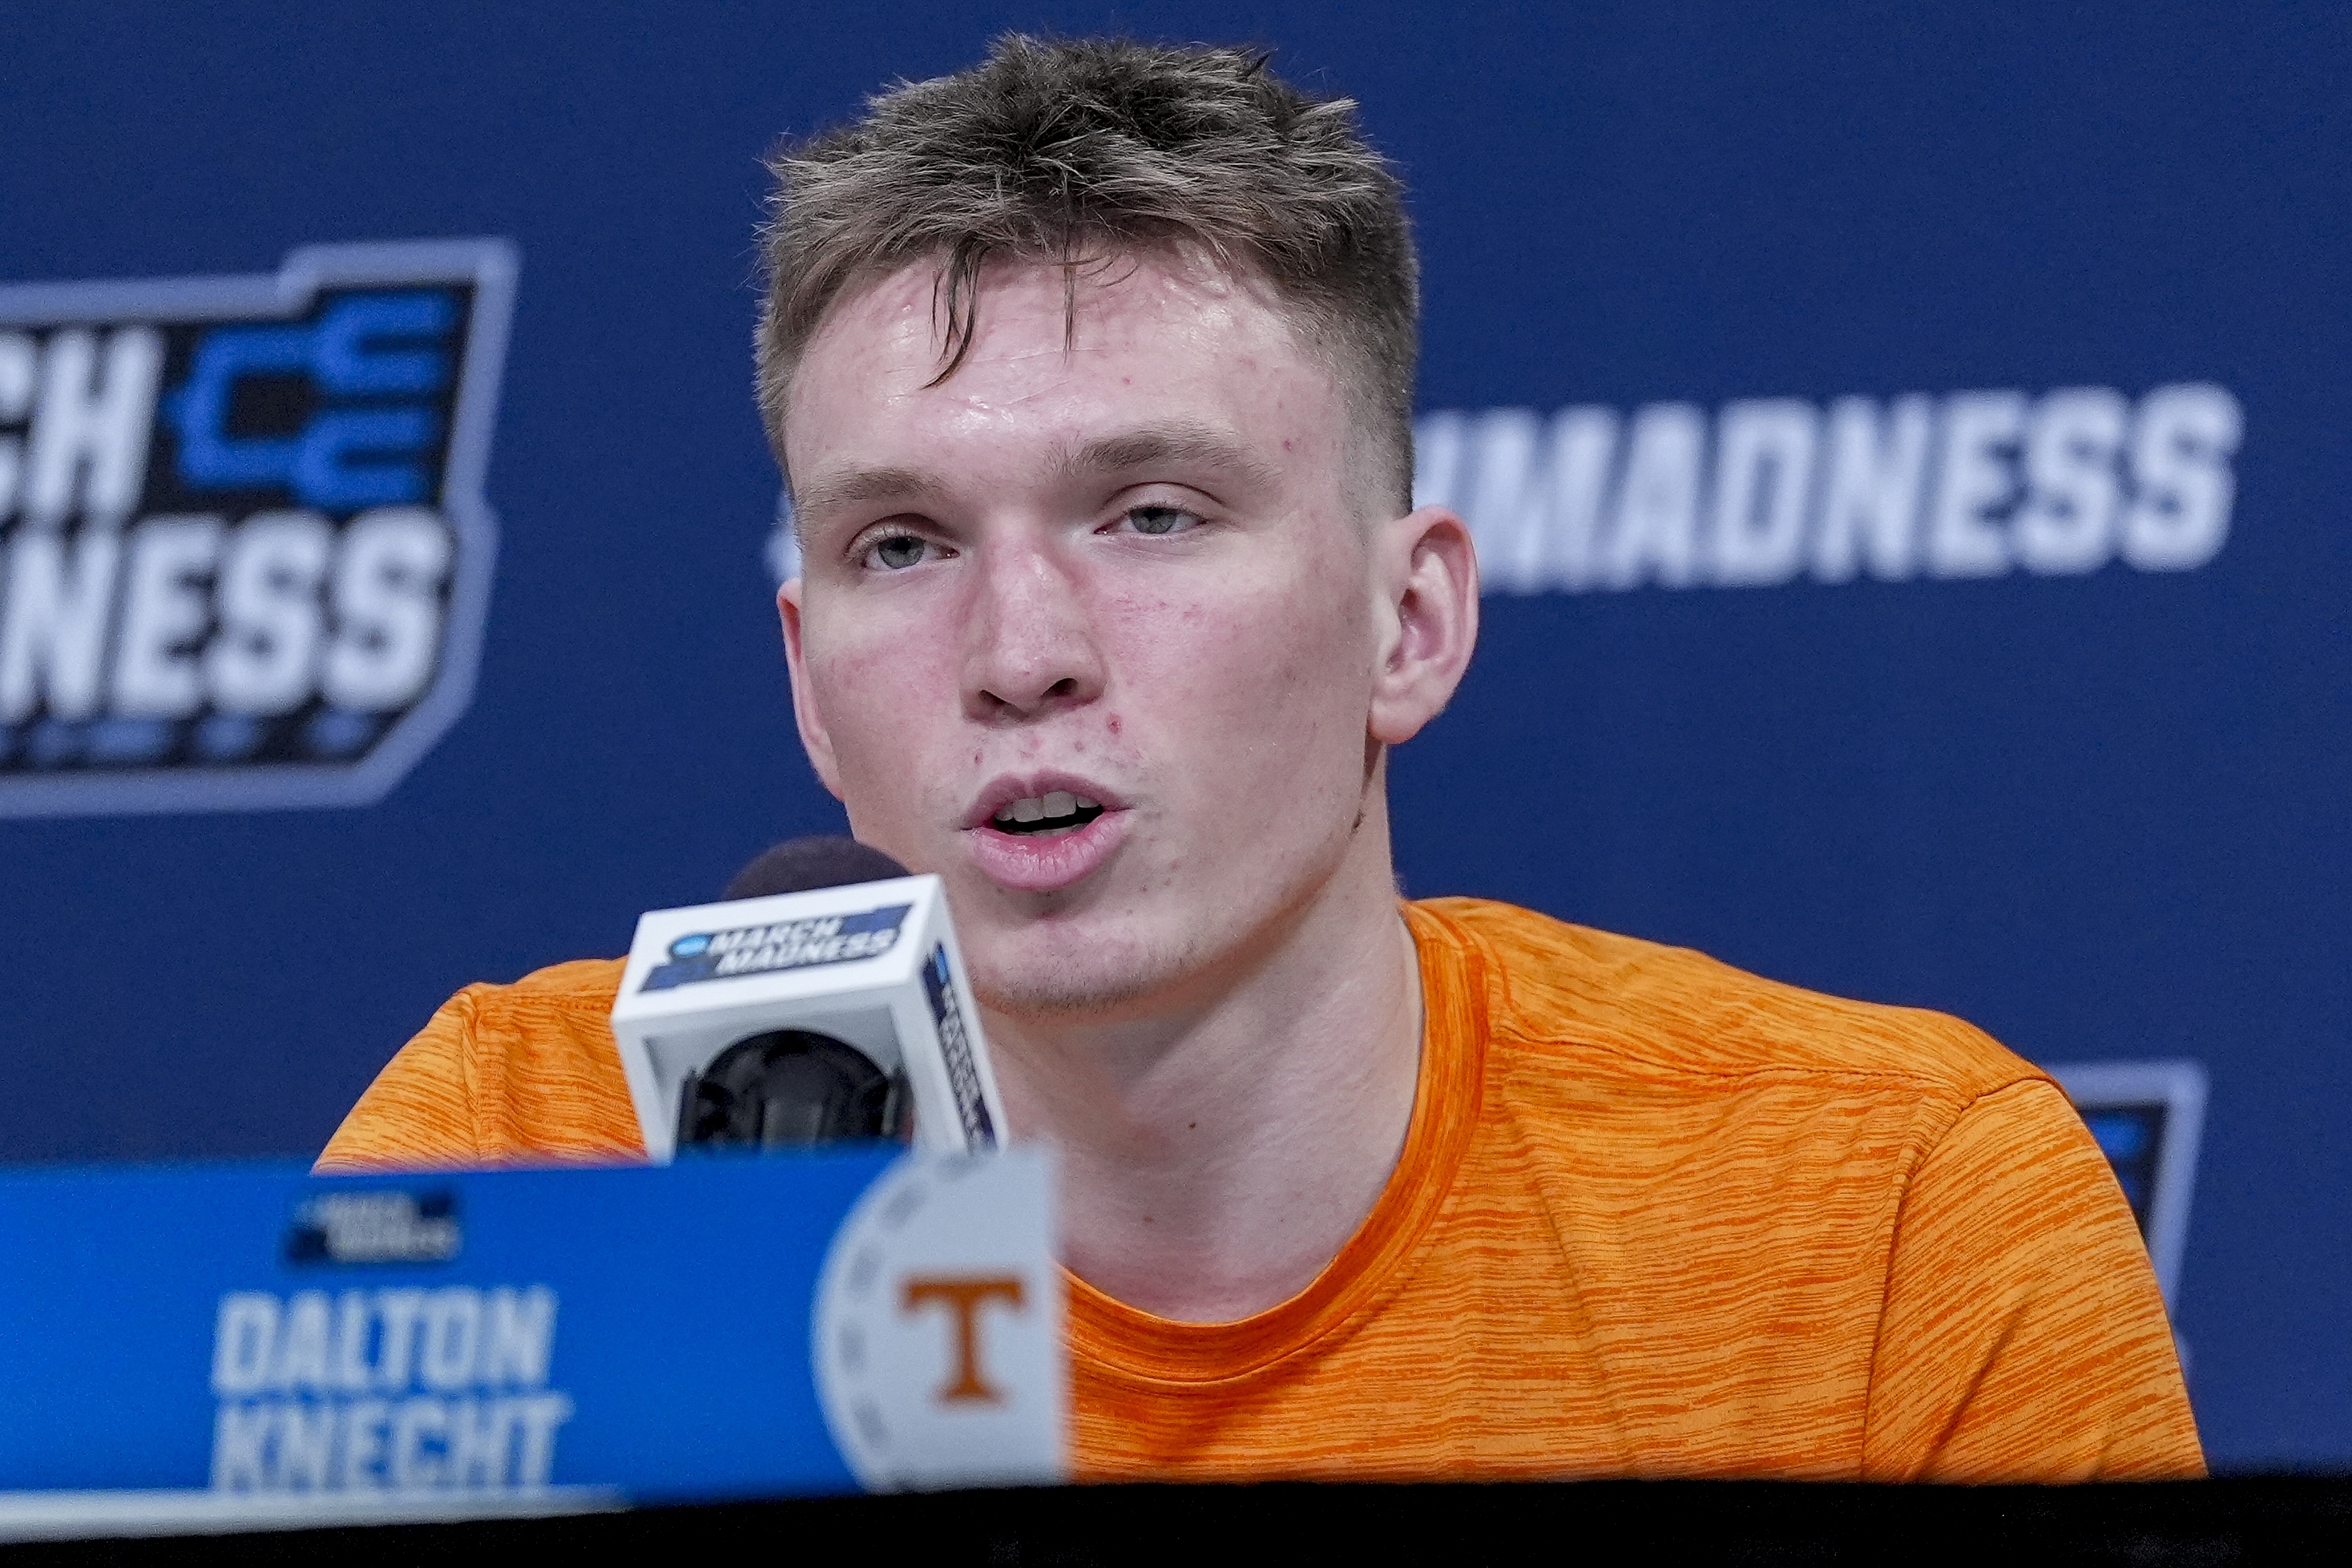 Tennessee Volunteers G Dalton Knecht during media availabilities at the NCAA Tournament. (Photo by Jim Dedmon of USA Today Sports)